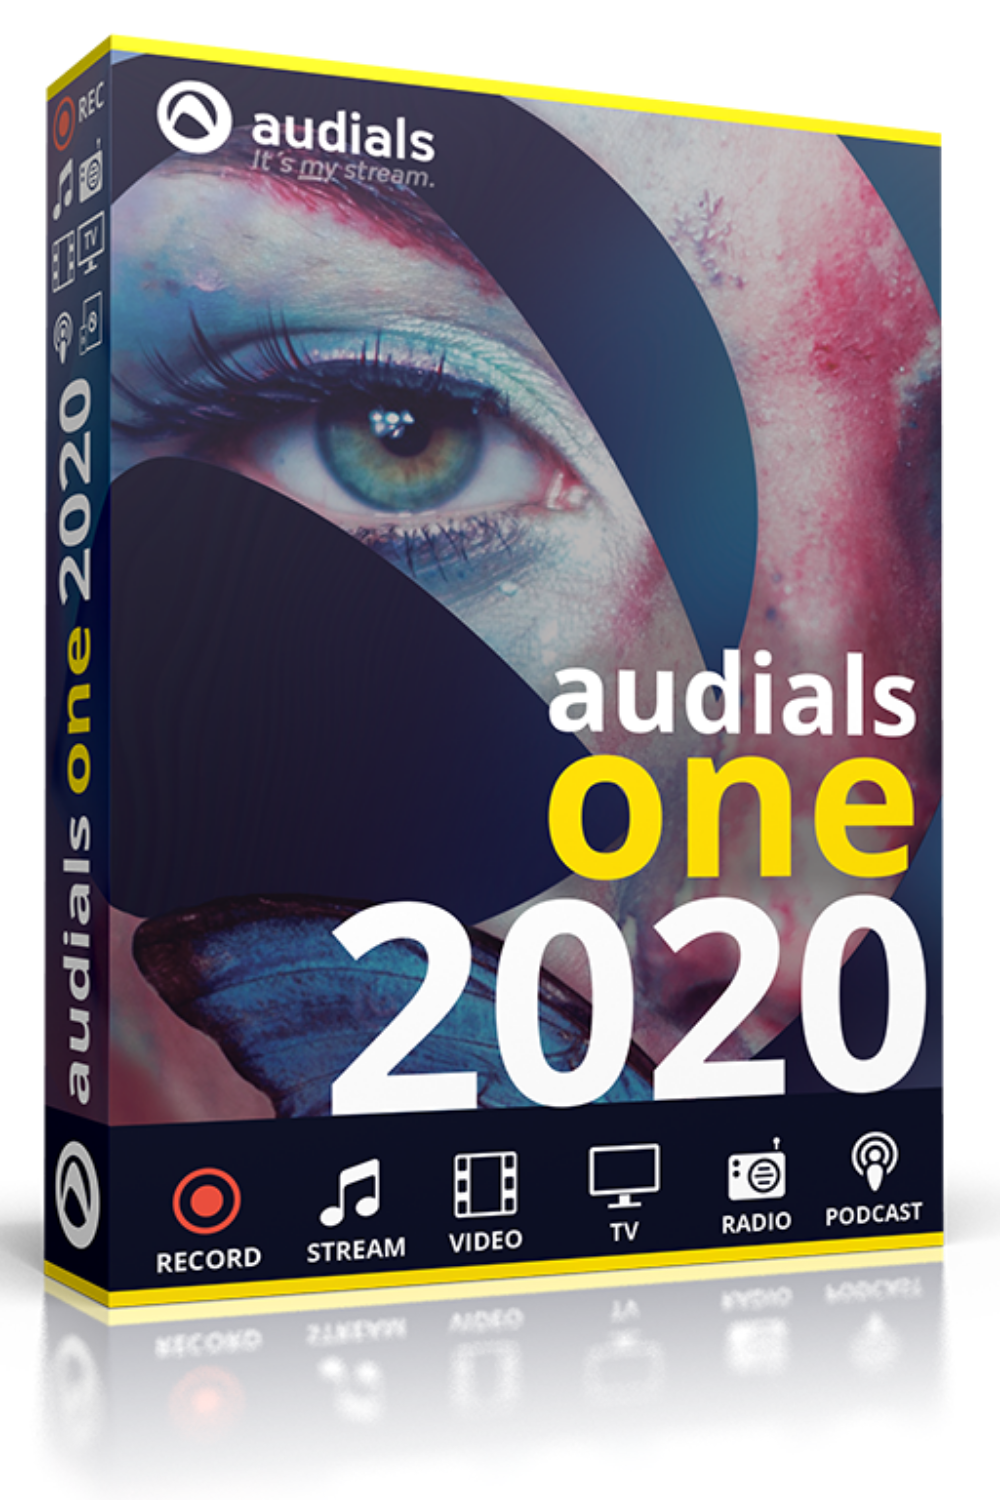 Audials one mac free download windows 7